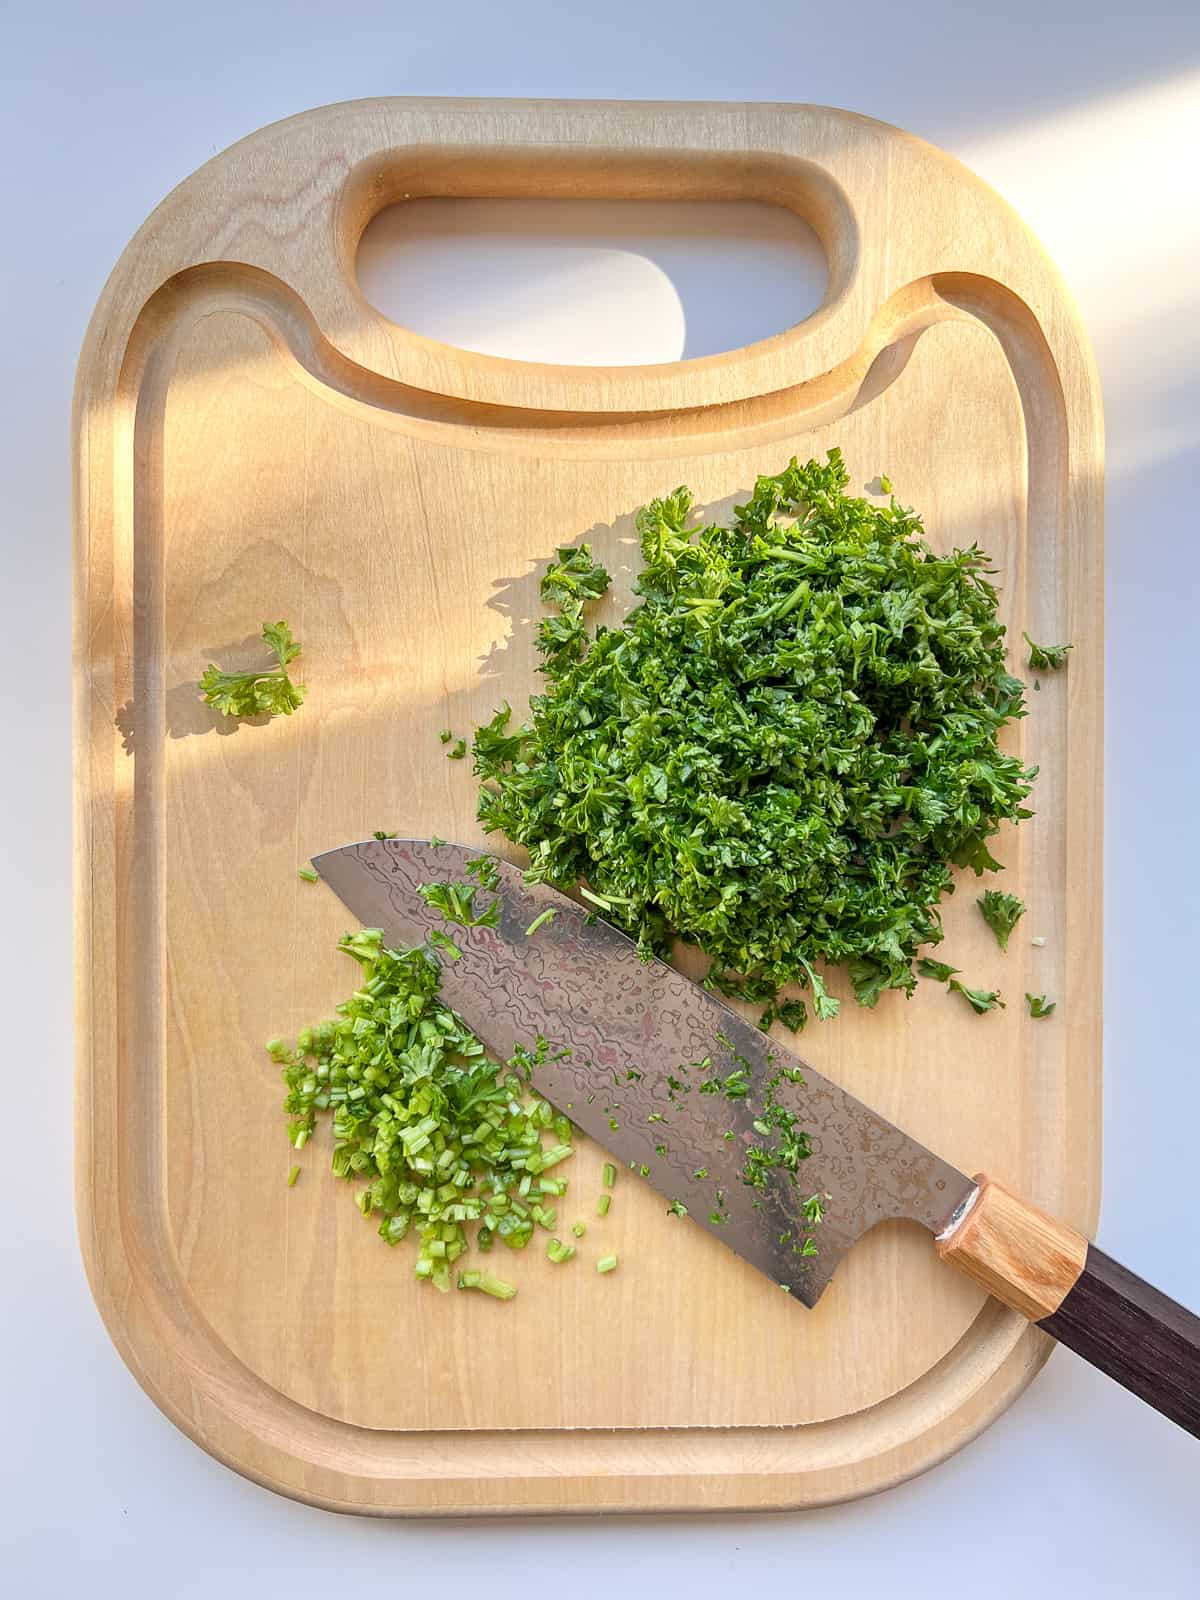 An image of parsley being chopped.